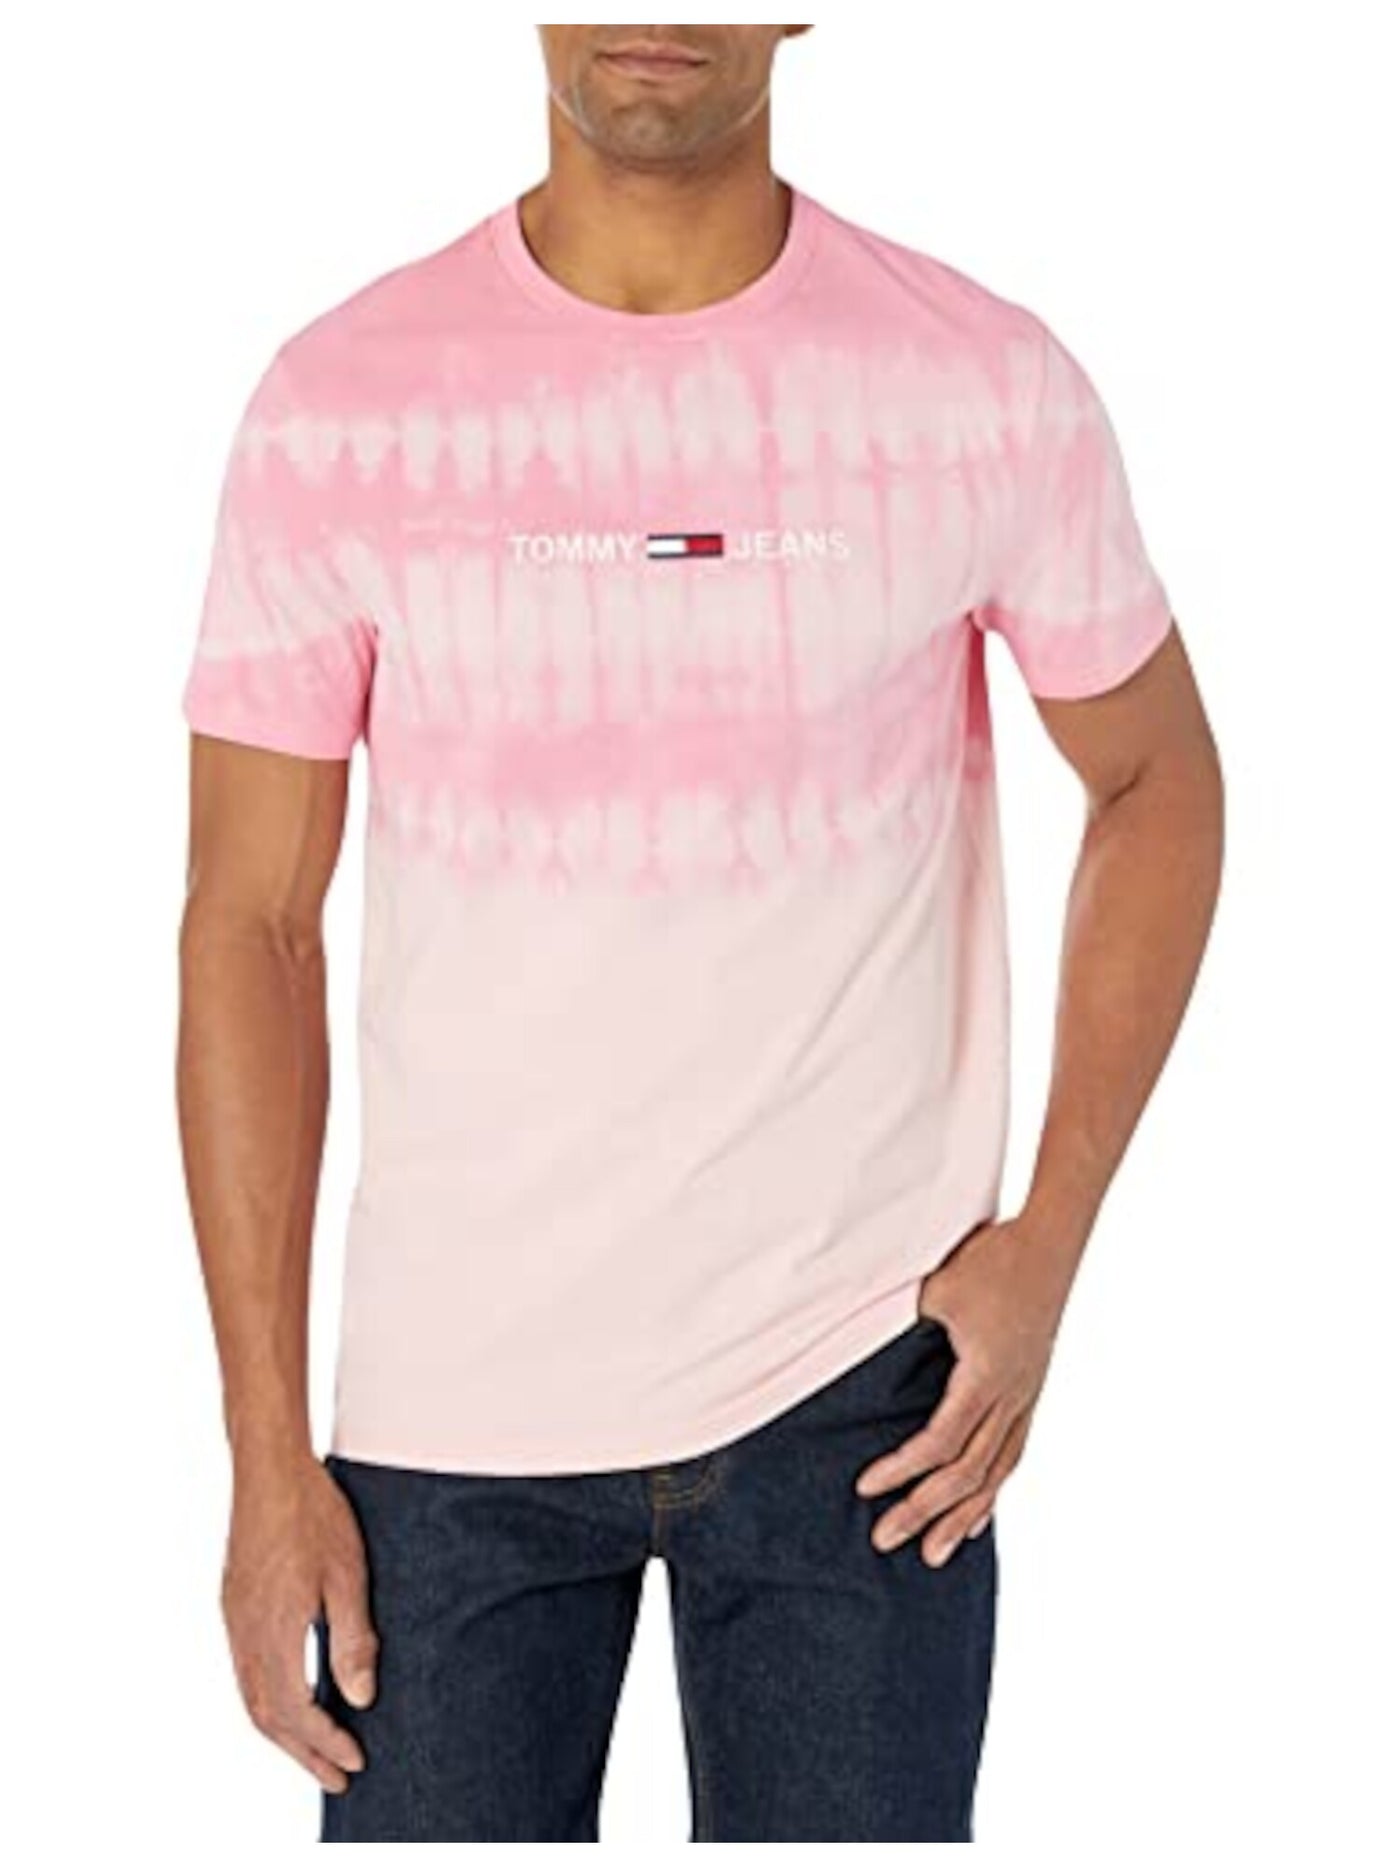 TOMMY JEANS Mens Good Times Pink Tie Dye Classic Fit T-Shirt XXL